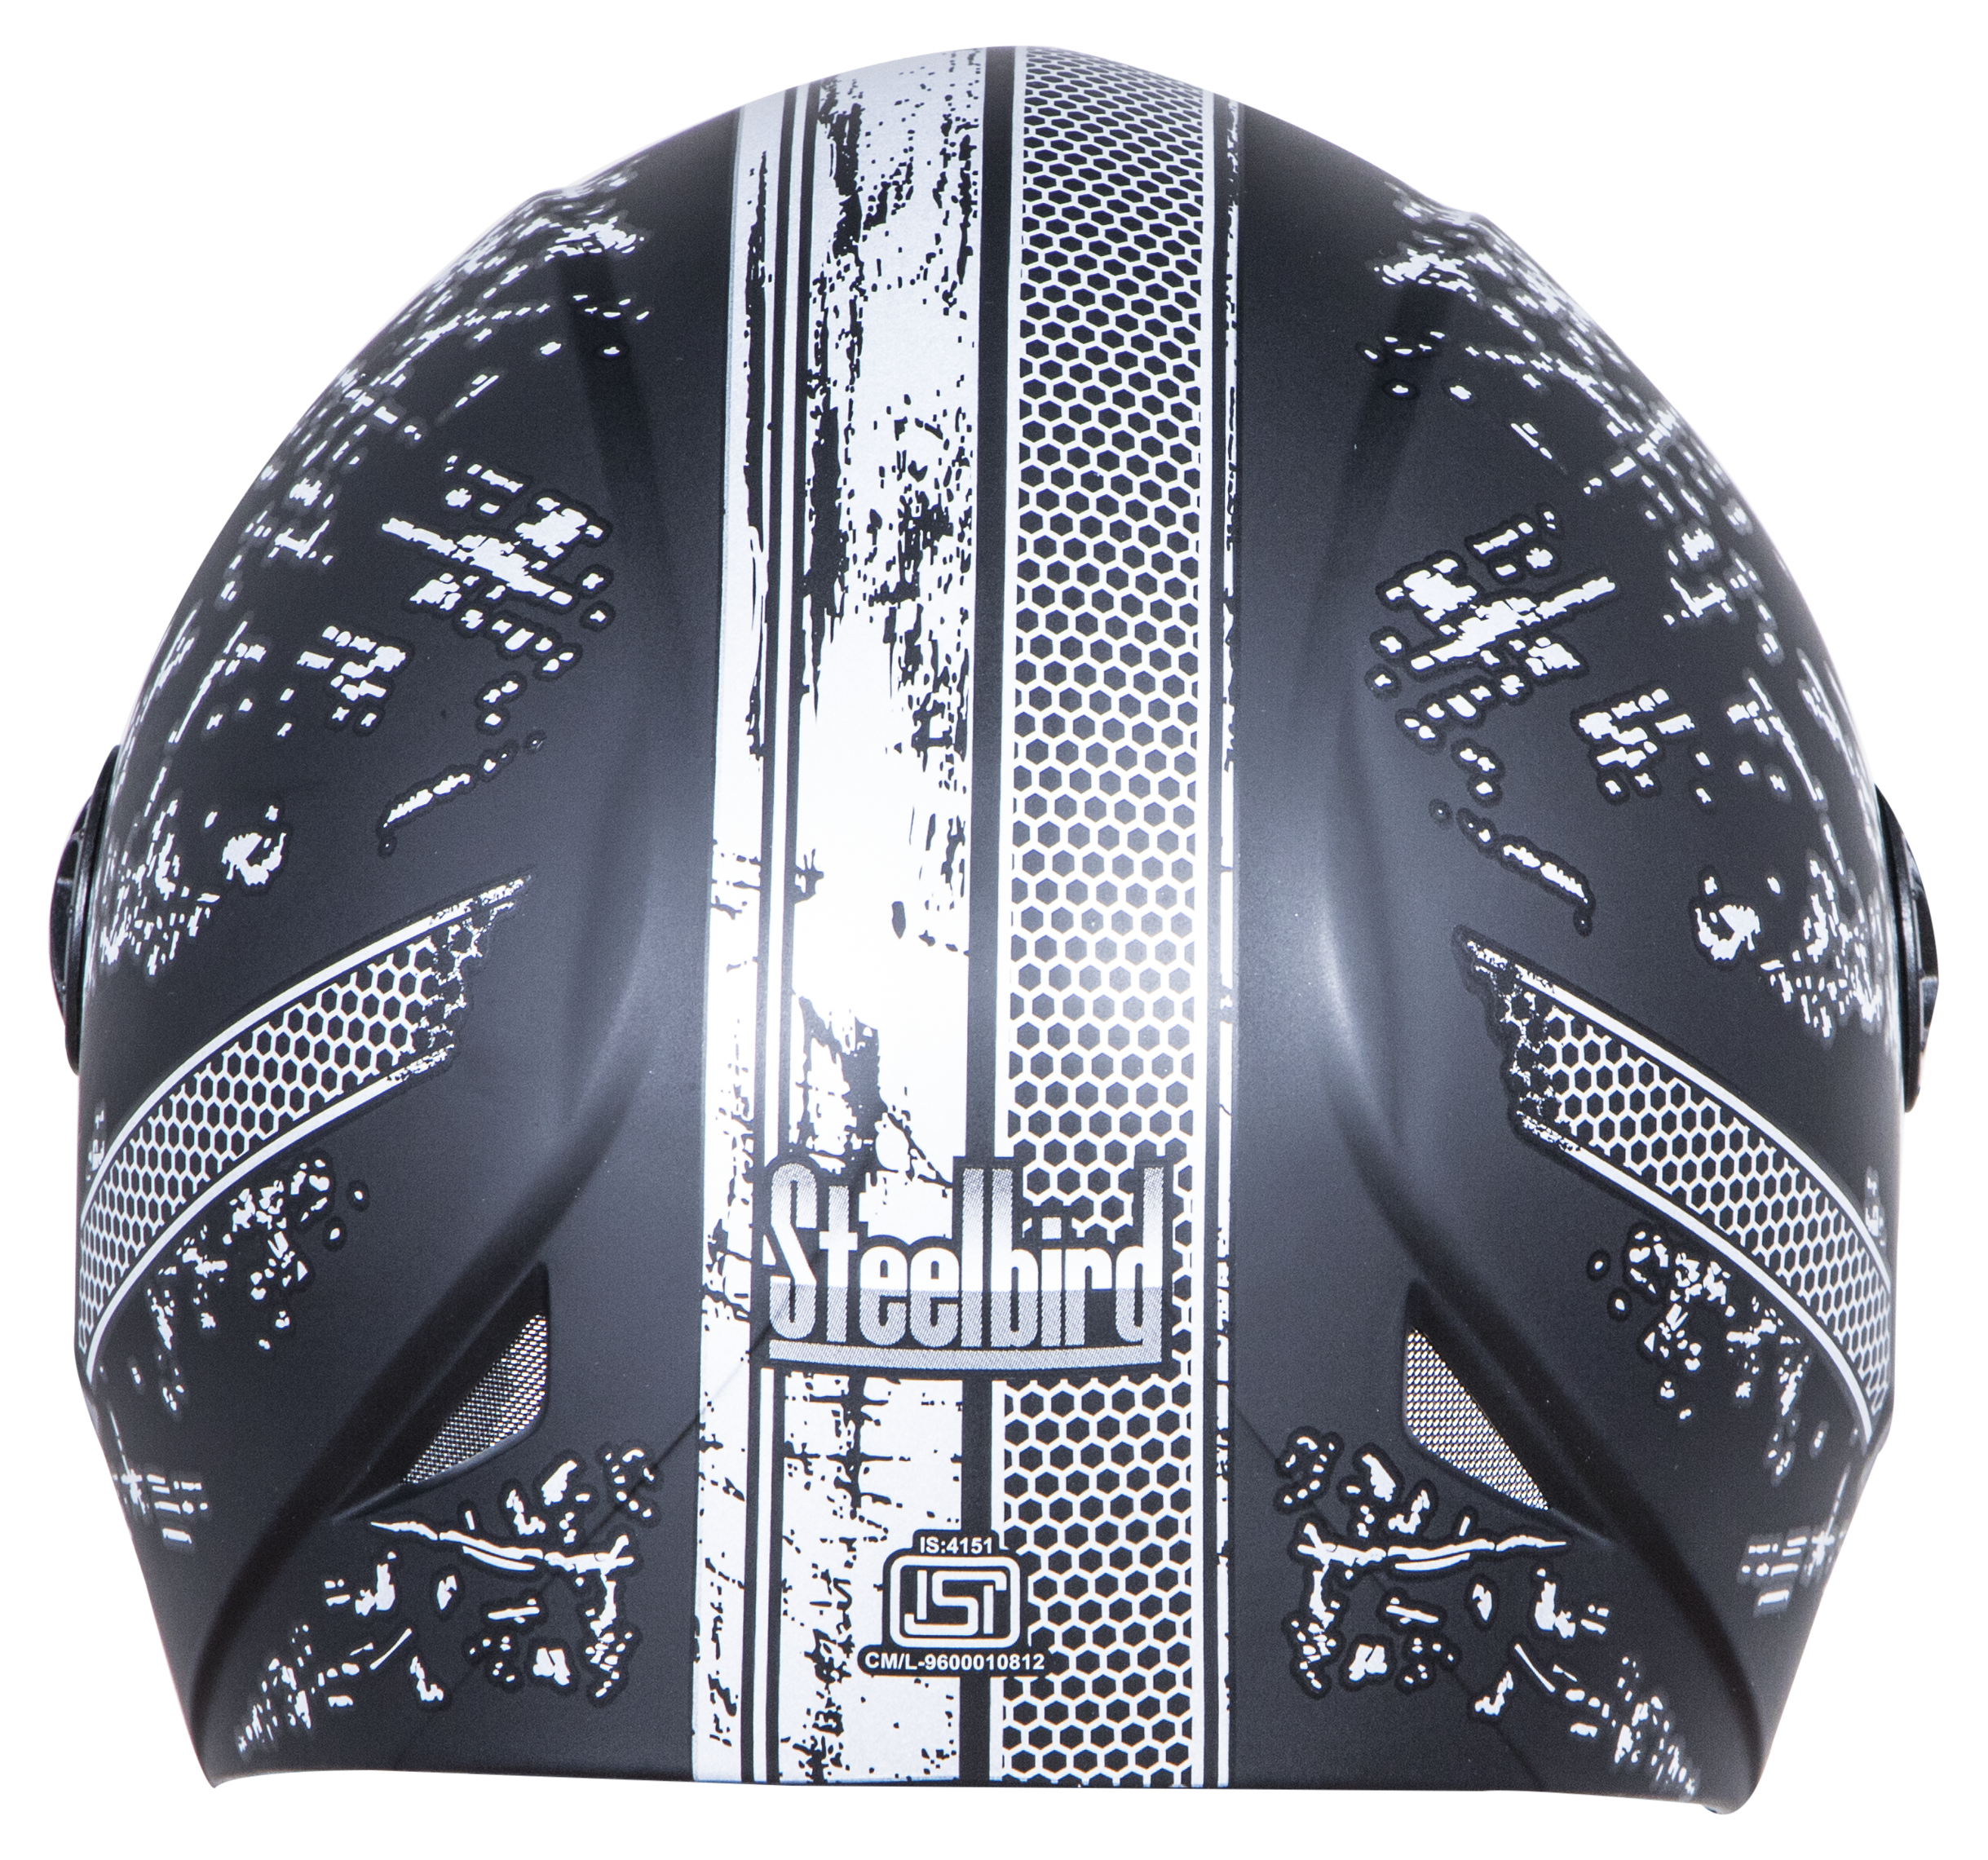 SBH-1 Adonis R2K Mat Black With Silver( Fitted With Clear Visor Extra Smoke Visor Free)